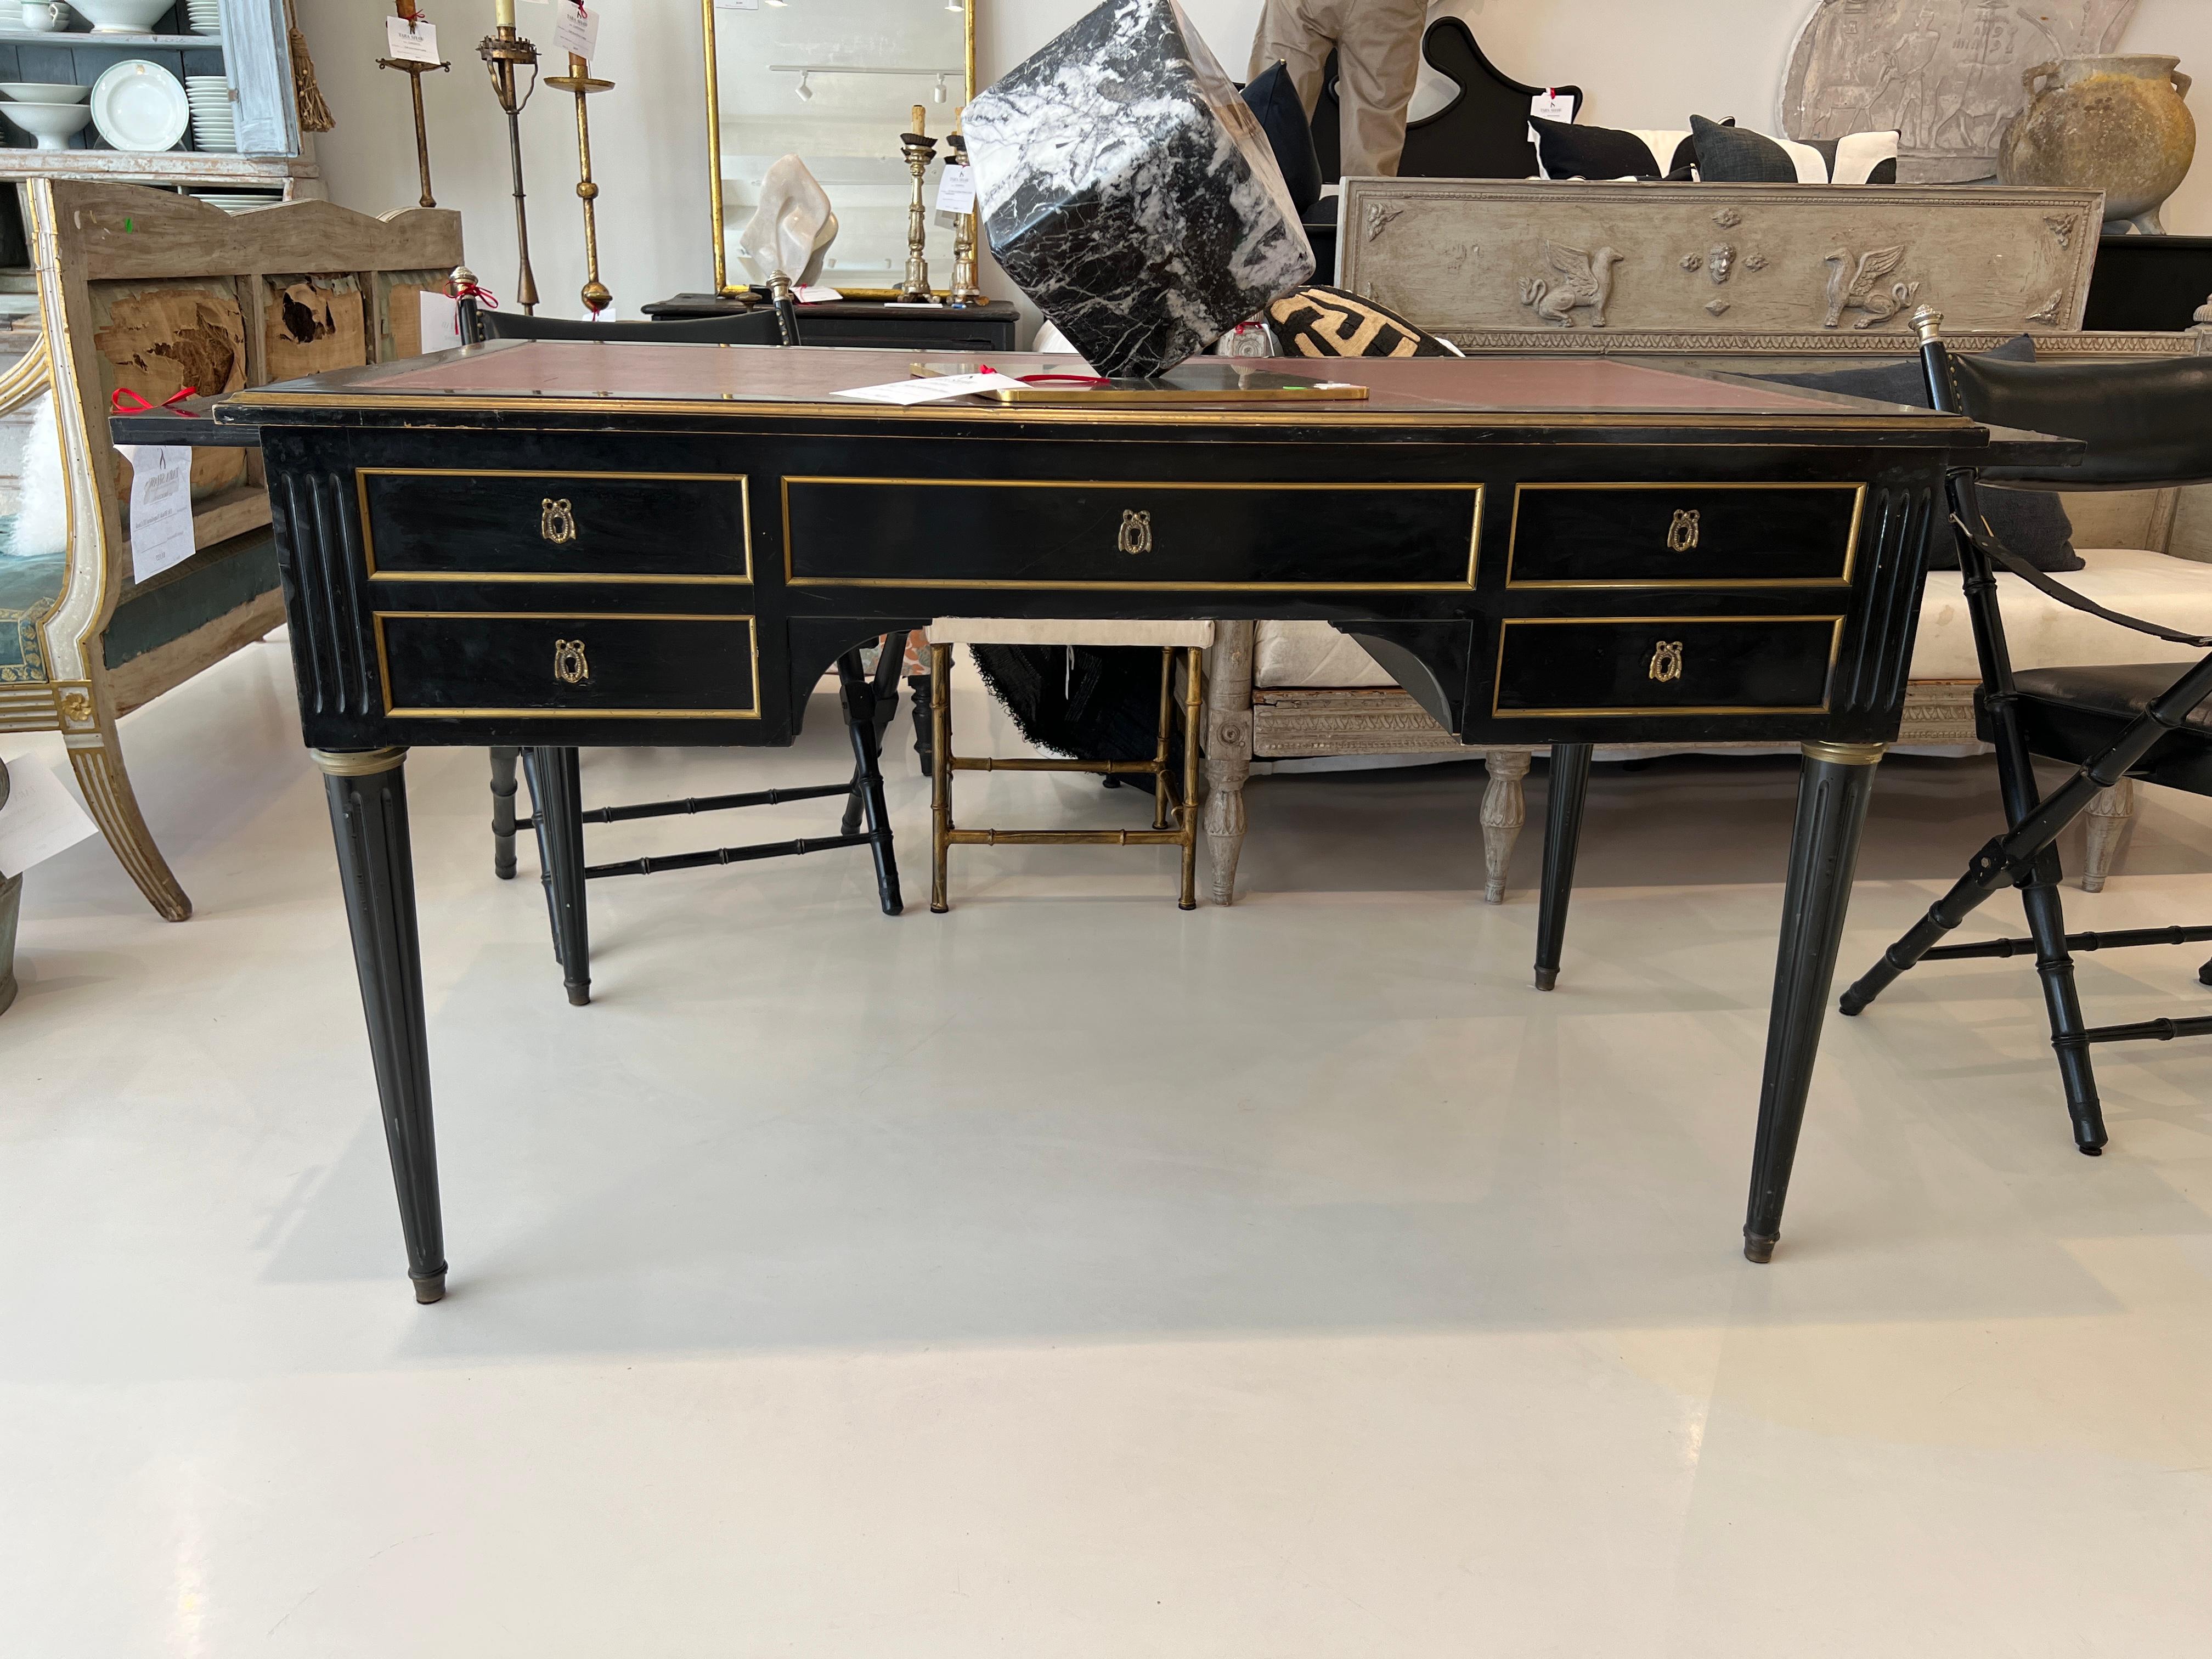 Straight lines define this elegant desk in black and gold with a red leather top. Added enhancements are the pull-out leather topped platforms on either side.